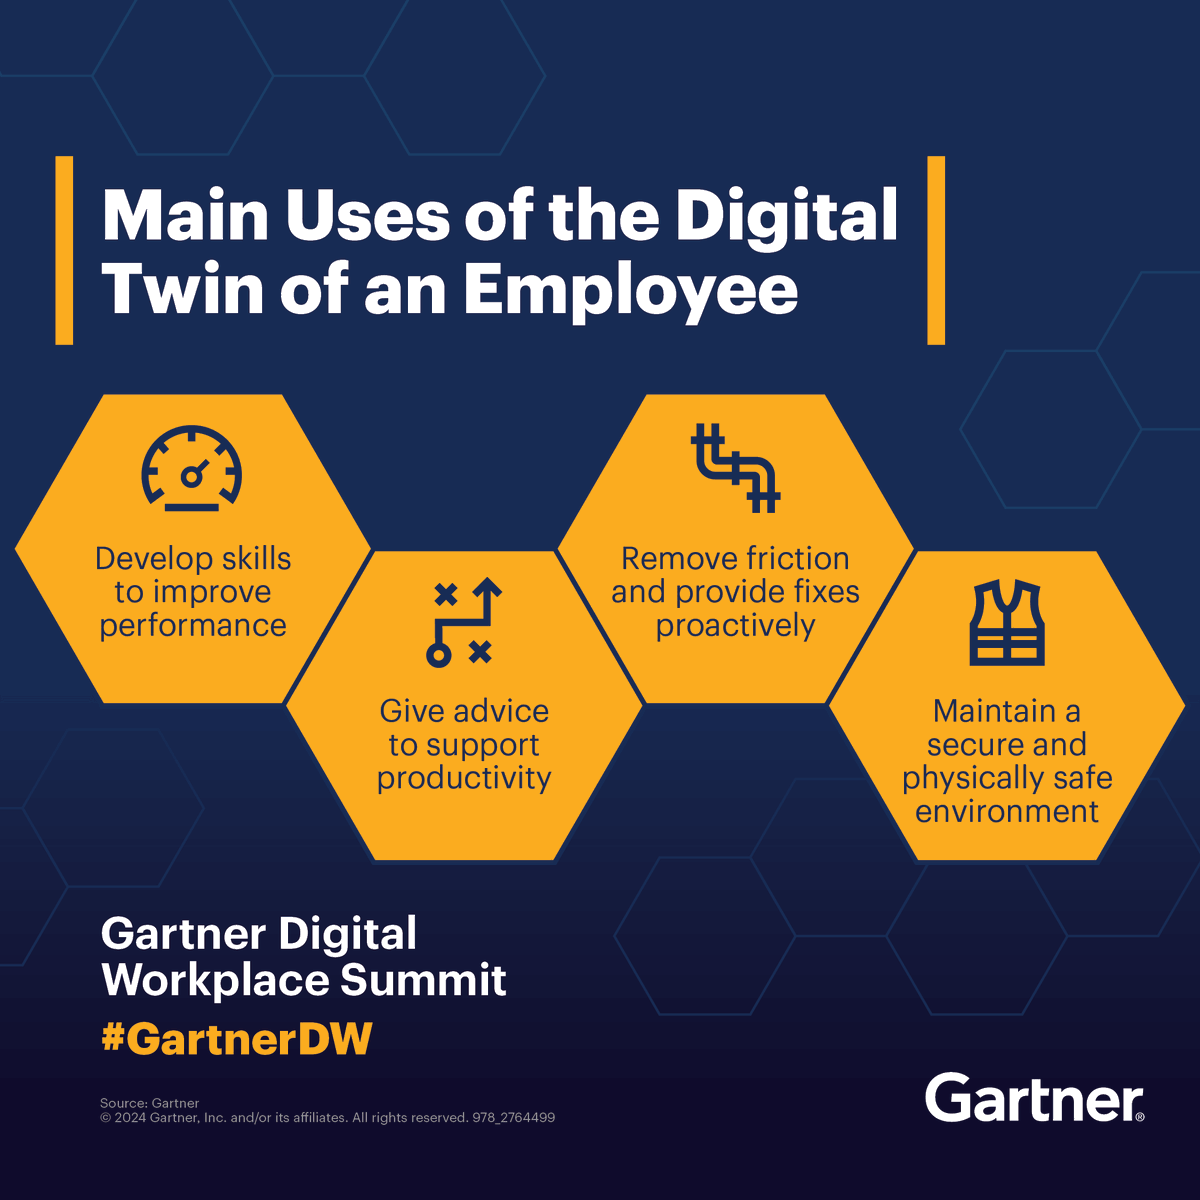 A former figment of the imagination has now become a workplace reality: #digital twins. Gartner expert Helen Poitevin explores how to make this new workplace concept tangible for your workforce starting today: gtnr.it/3TTZO6z #GartnerDW #Hybrid #FutureOfWork #GenAI